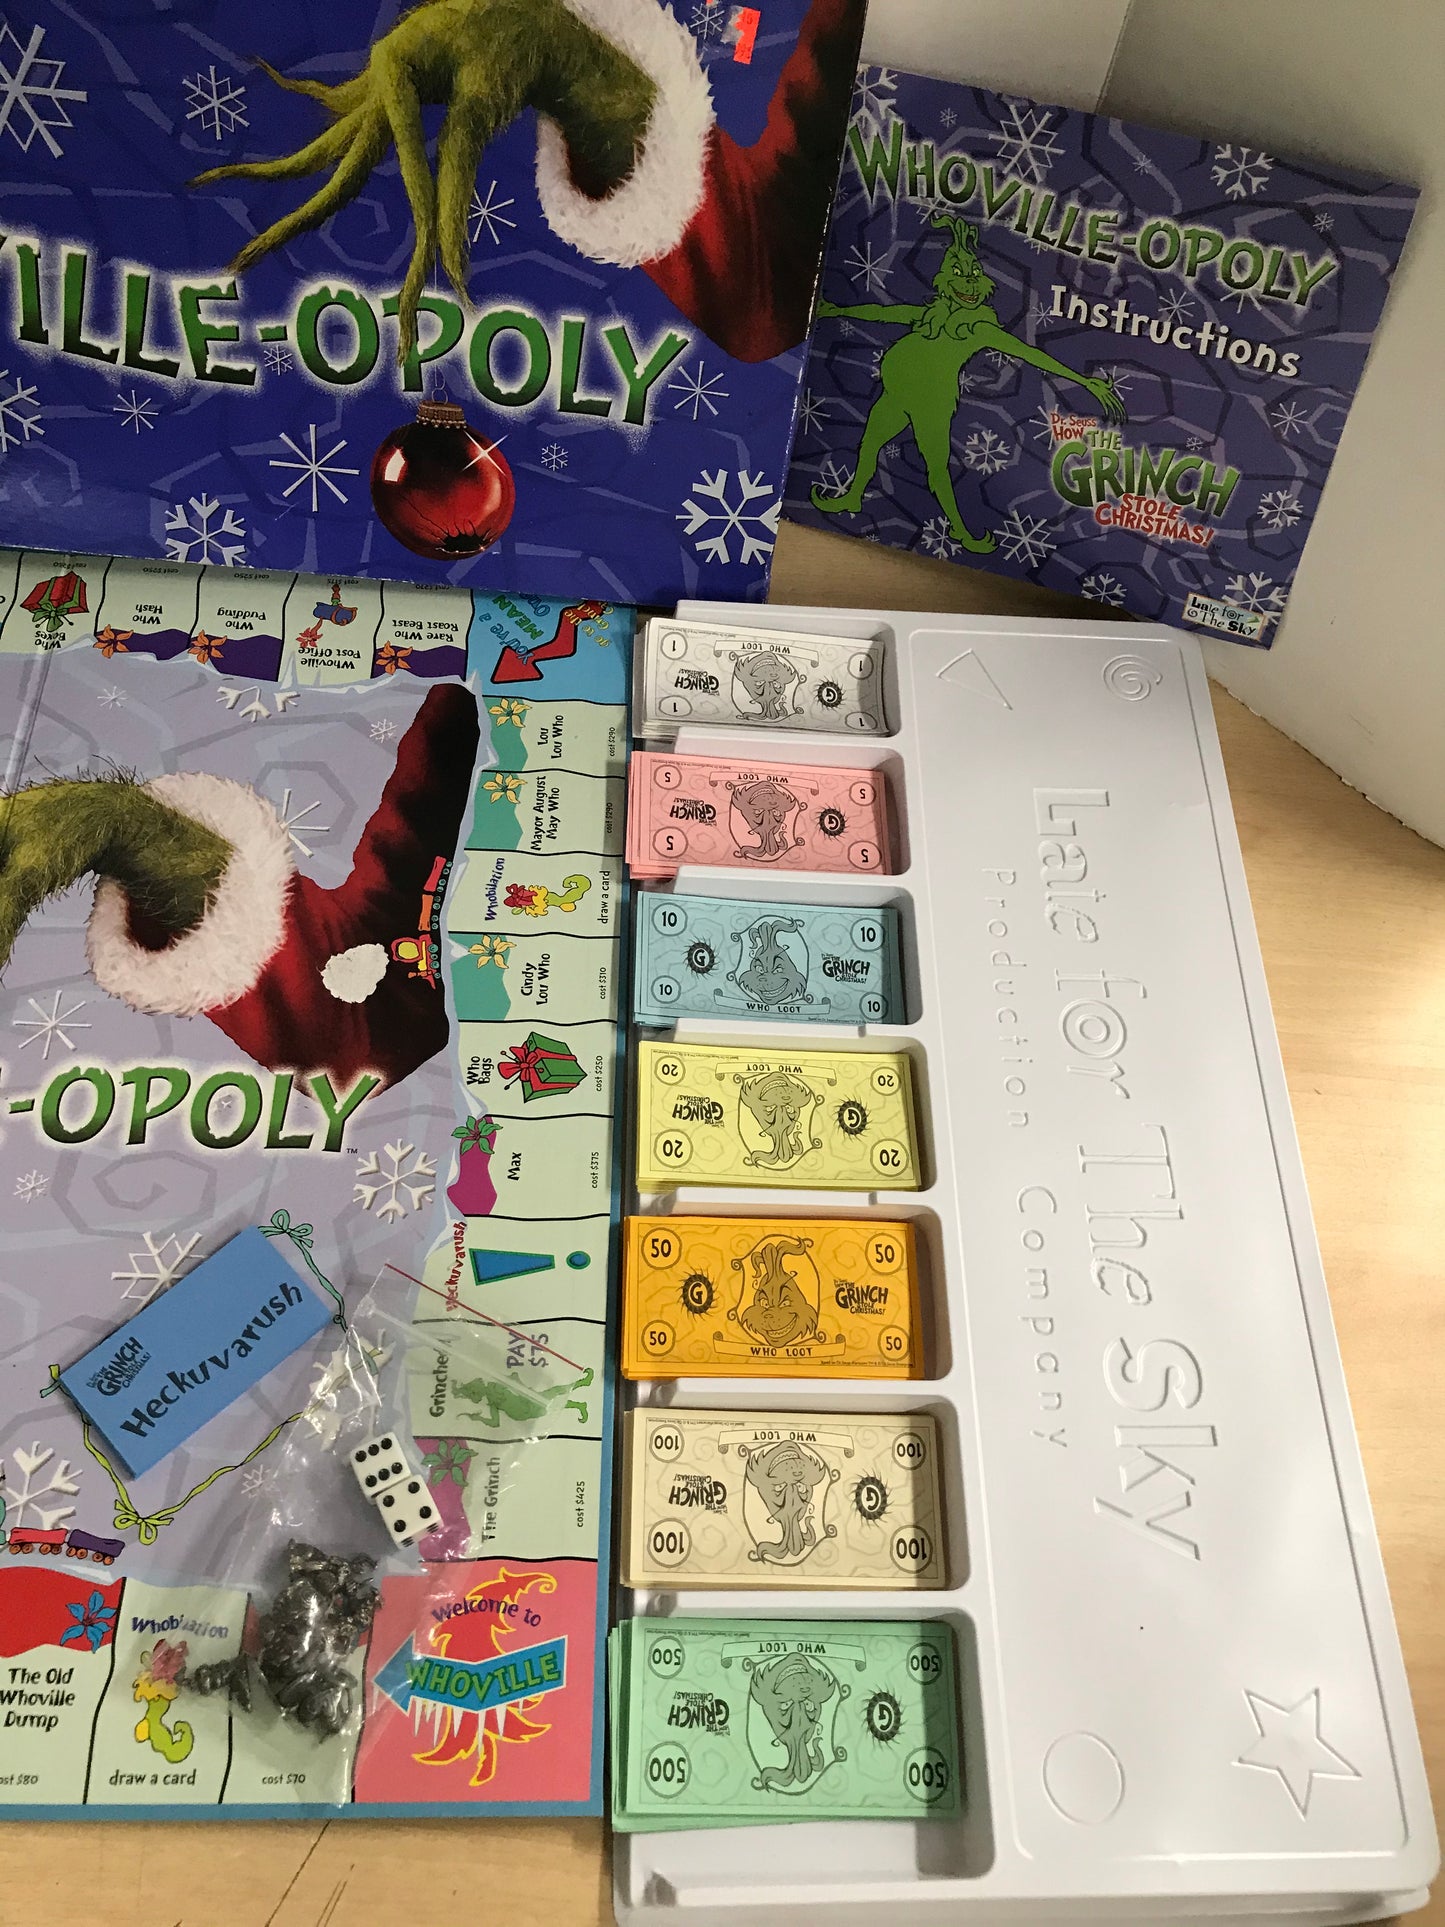 Y Game How The Grinch Stole Christmas Monopoly Style Game Complete Excellent